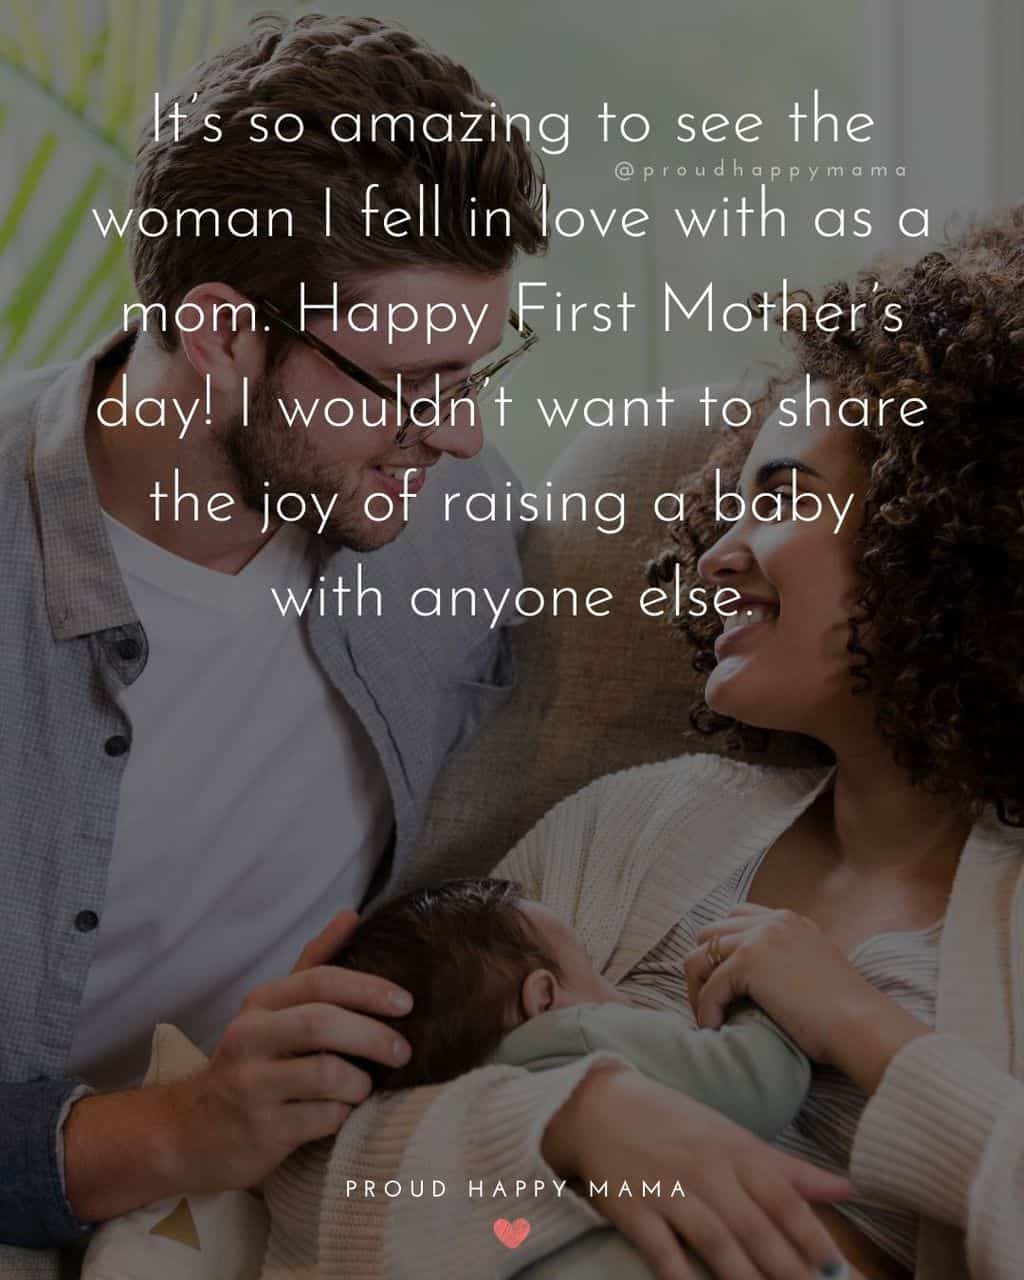 First Mothers Day Quotes - It’s so amazing to see the woman I fell in love with as a mom. Happy First Mother’s day! I wouldn’t want to